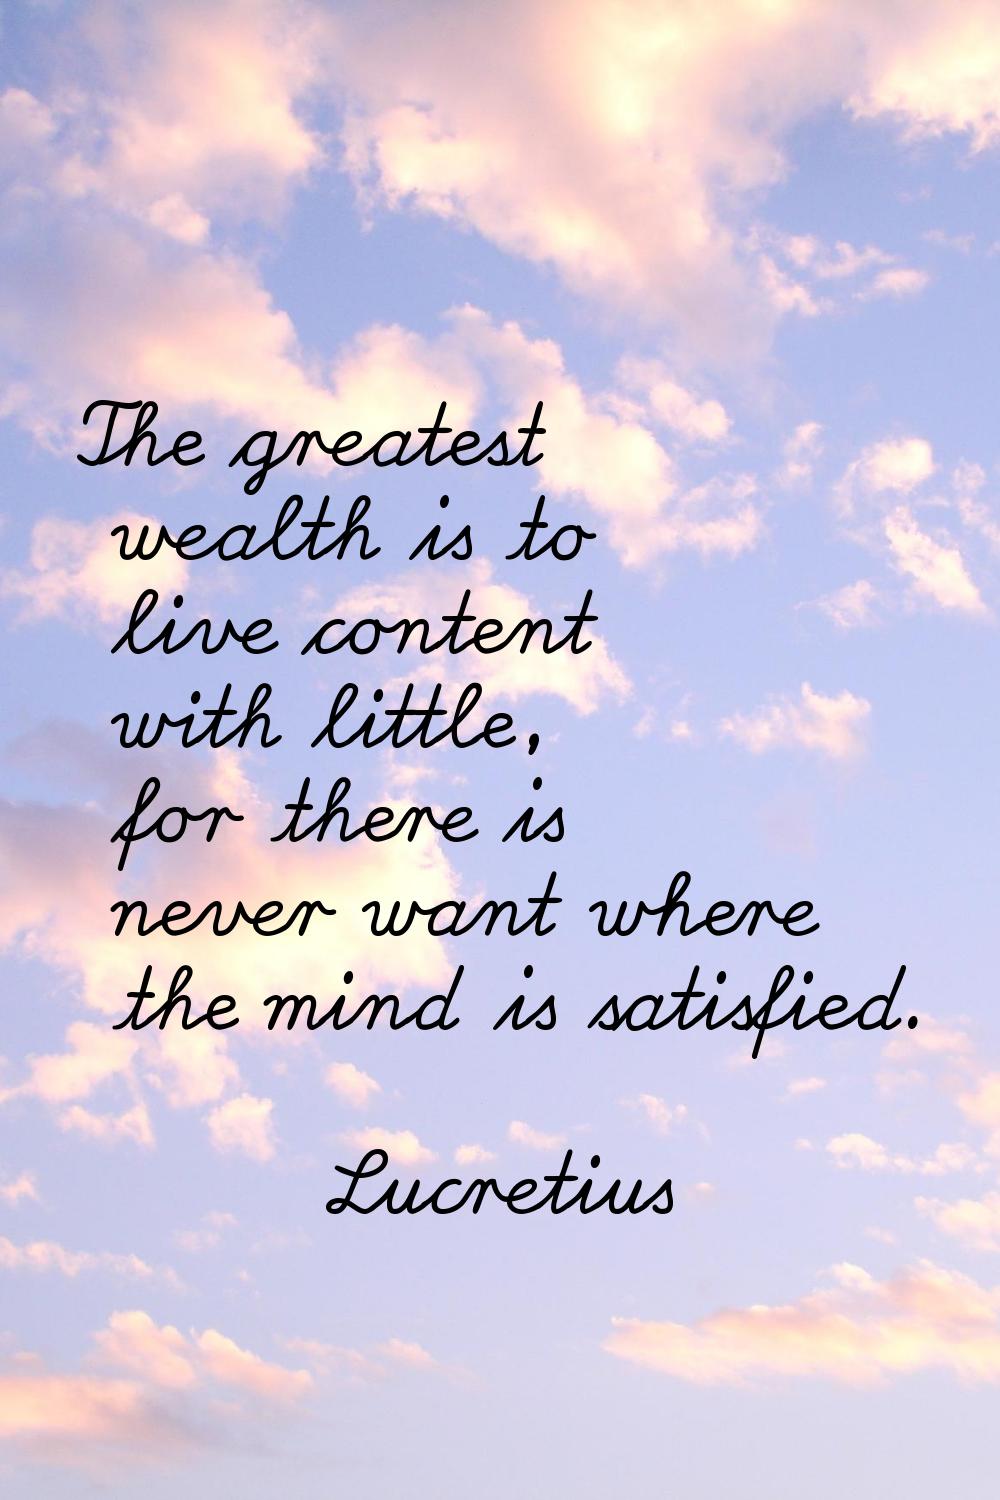 The greatest wealth is to live content with little, for there is never want where the mind is satis